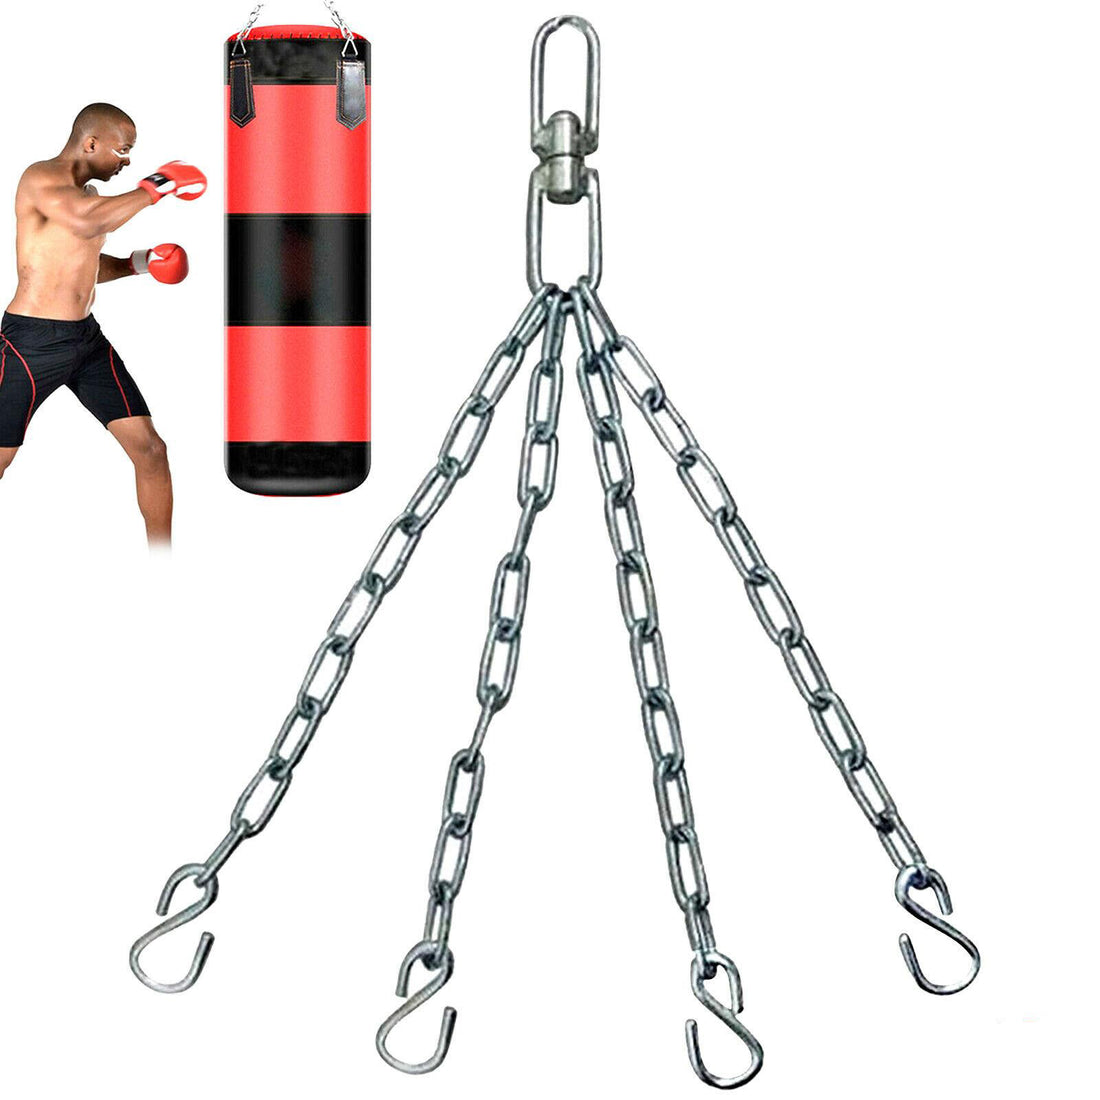 YNR Sports Punching Bag Heavy Filled Boxing Set Kickboxing Training Bags MMA